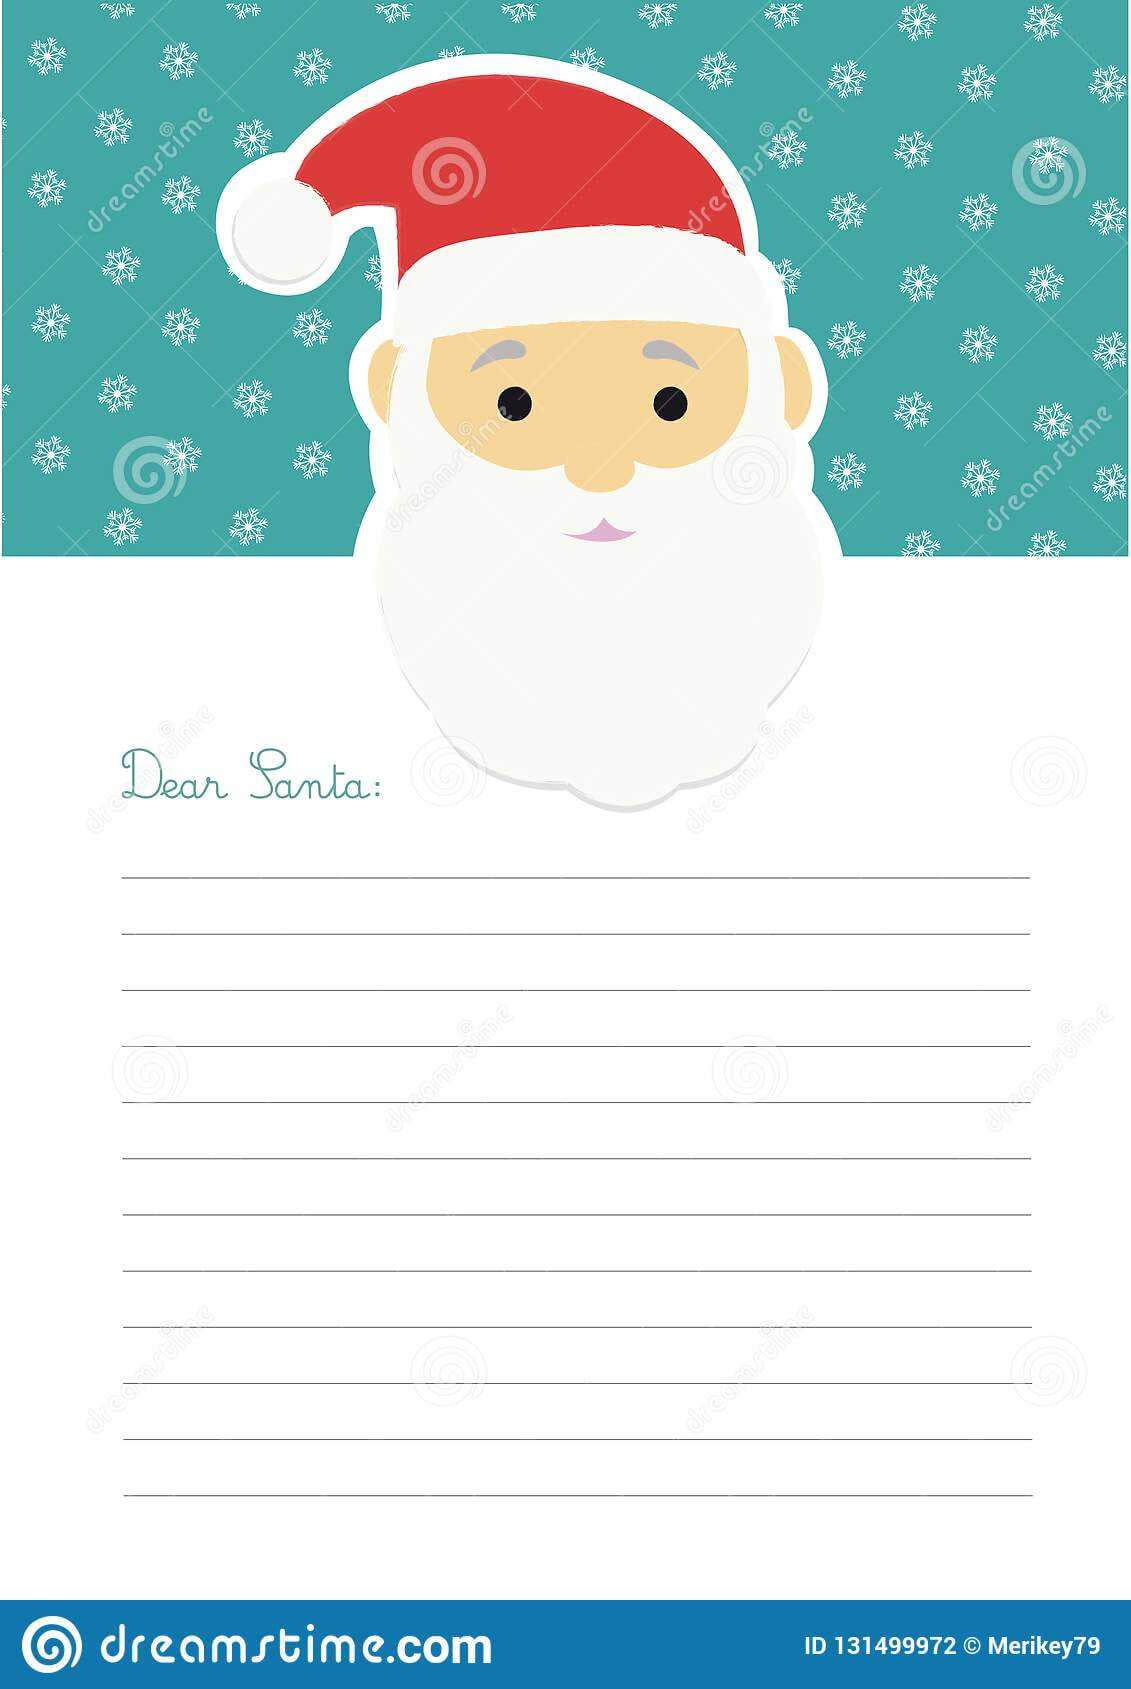 017 Blank Letter From Santa Template Free Ideas Send Letters Within Blank Letter From Santa Template